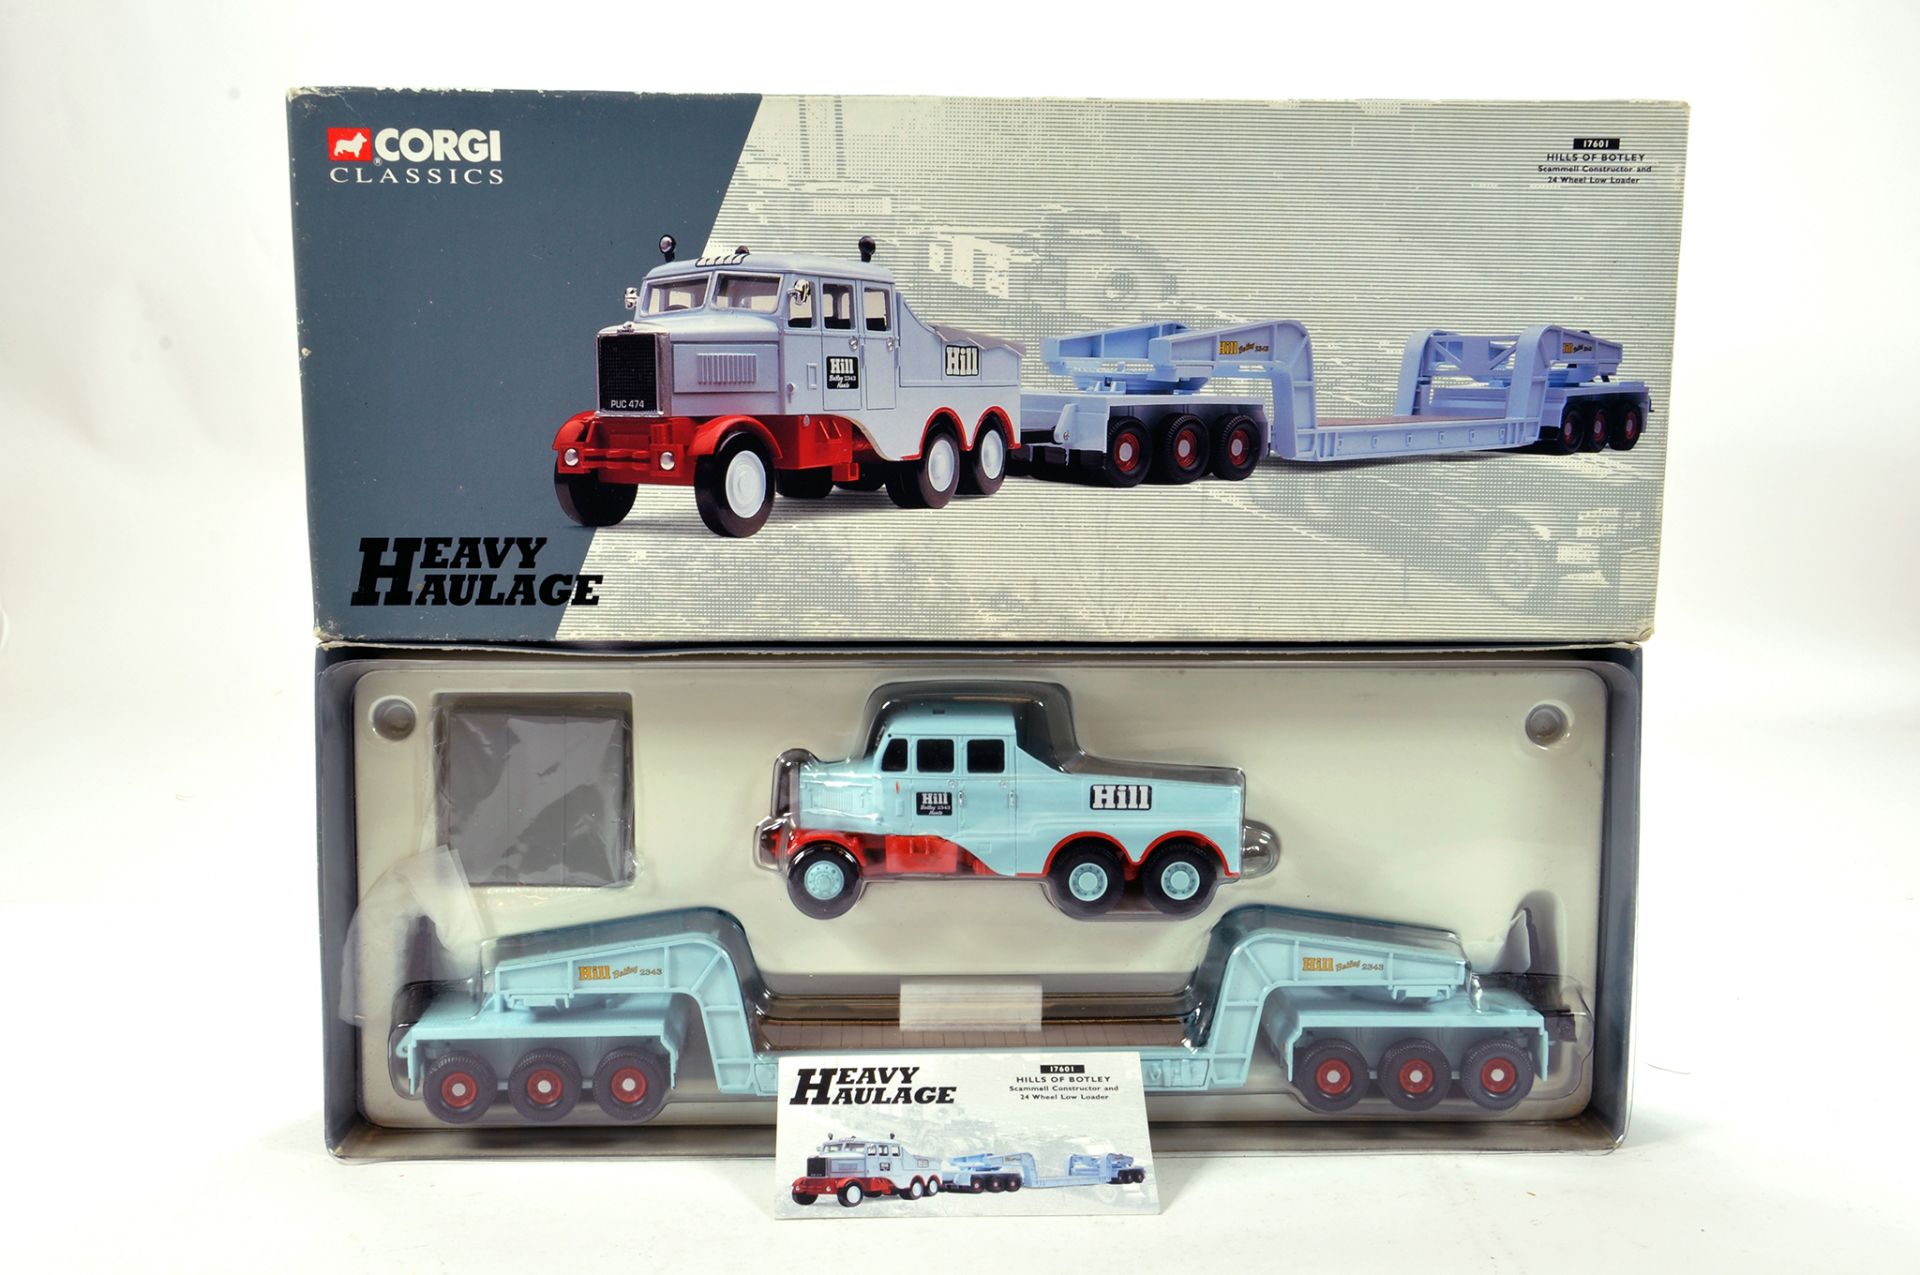 Corgi 1/50 diecast truck issue comprising No. 17601 Scammell Contractor and Low Loader in livery